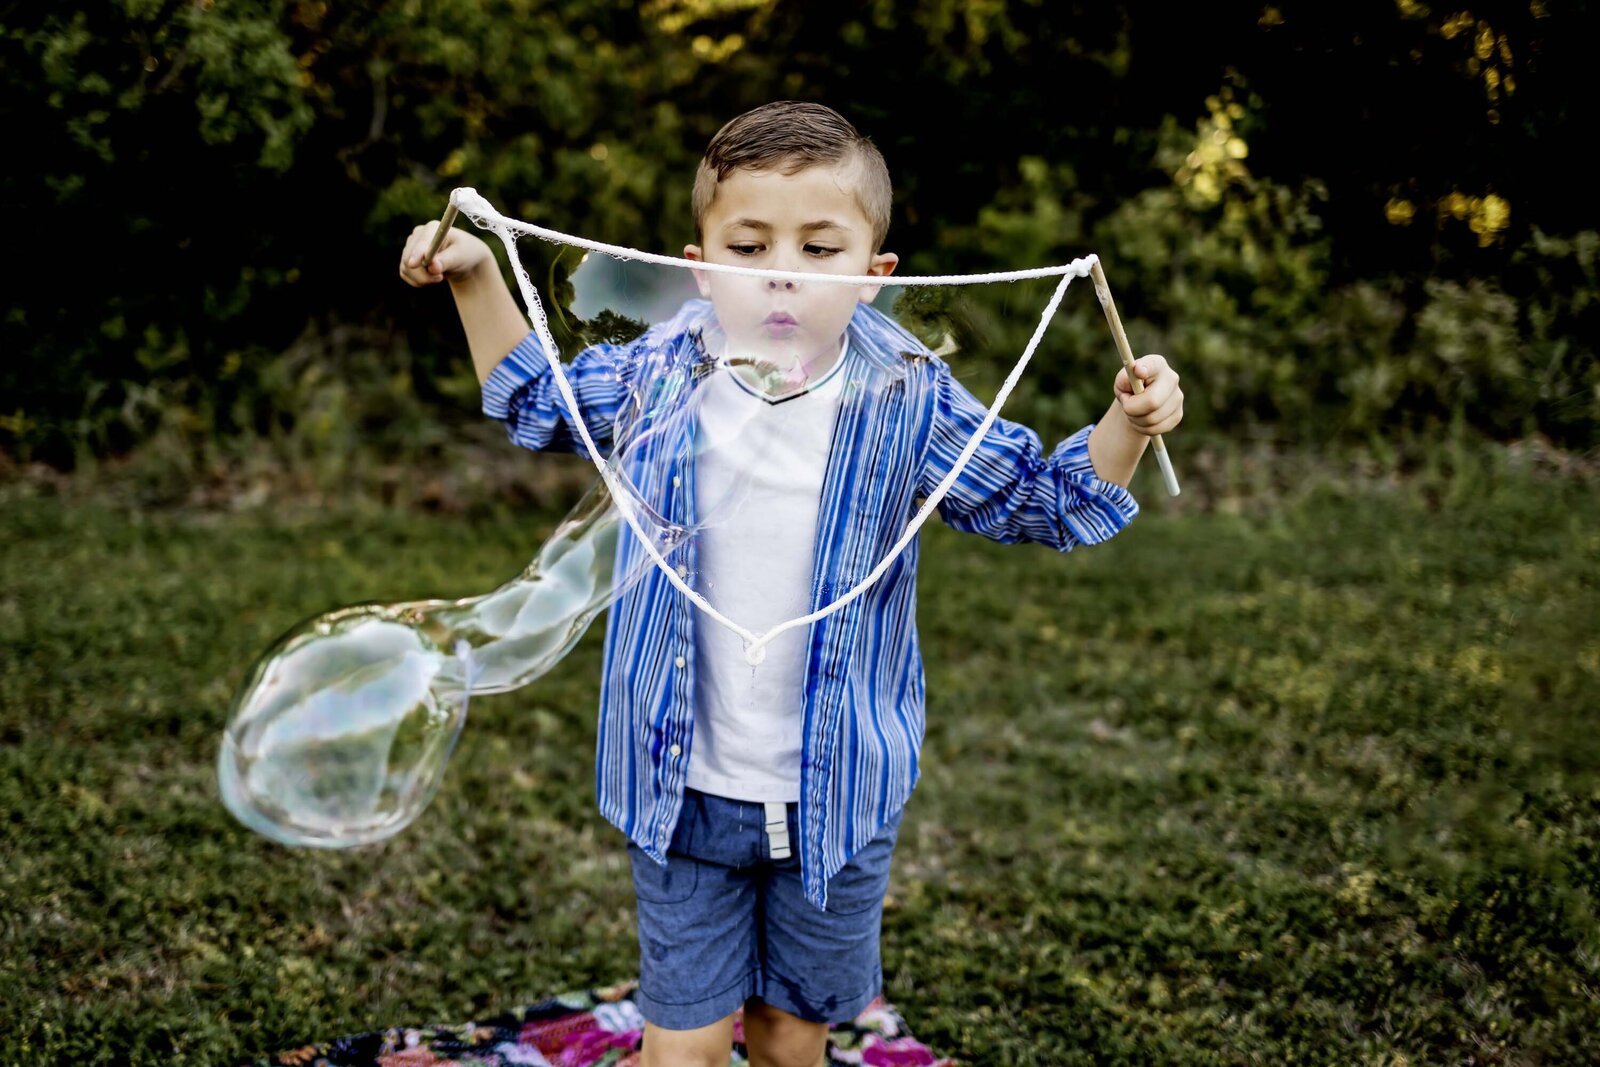 young boy from southlake texas plays with giant bubbles